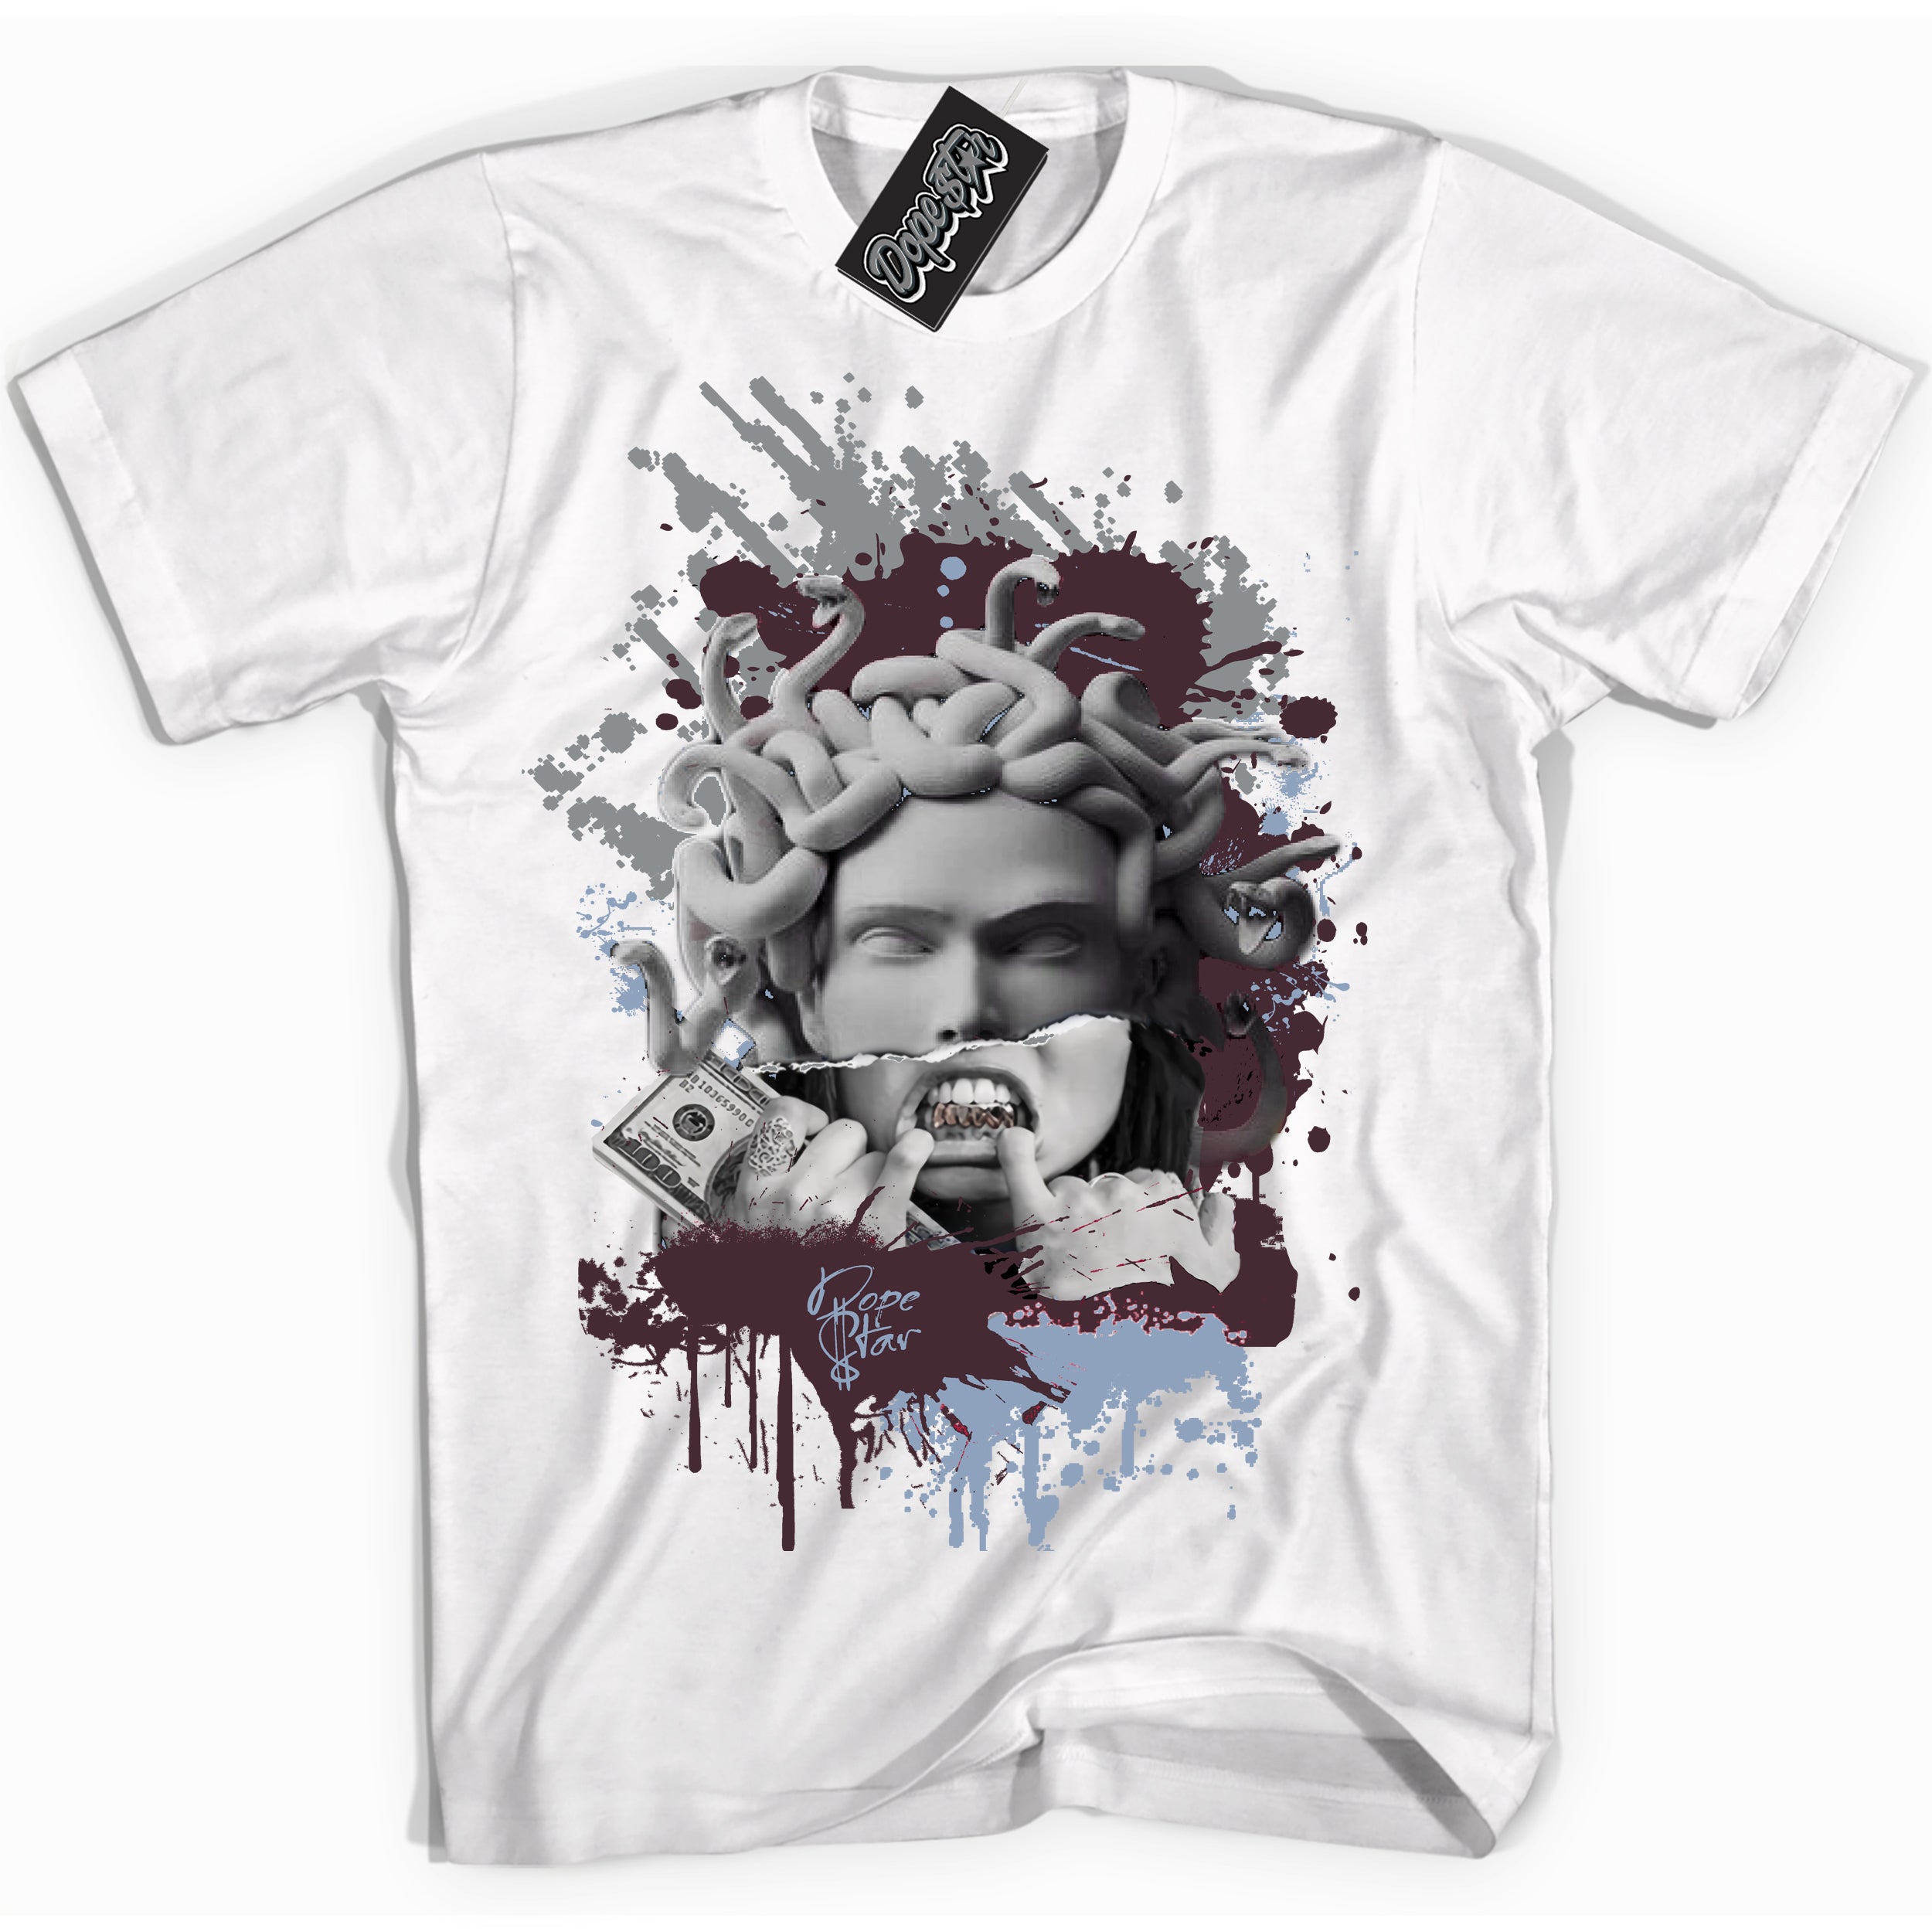 Cool White graphic tee with “ Medusa ” print, that perfectly matches Burgundy 5s sneakers 